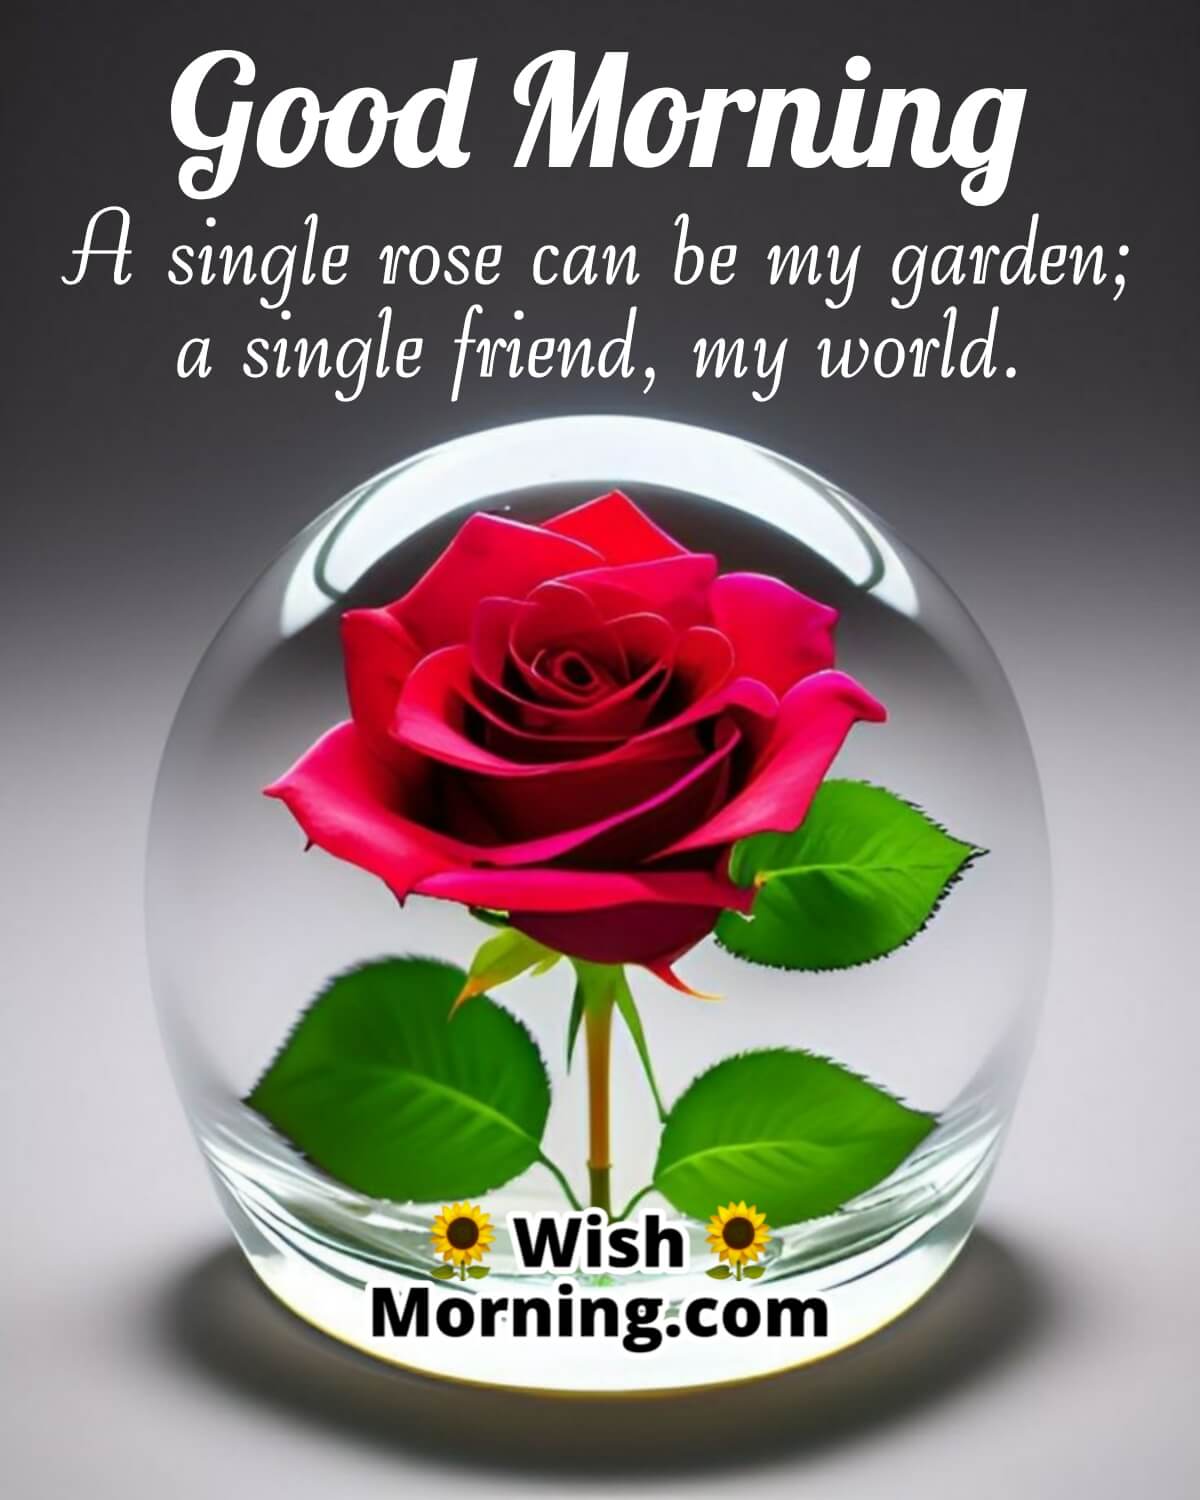 Good Morning Wishes With Rose Flower - Wish Morning